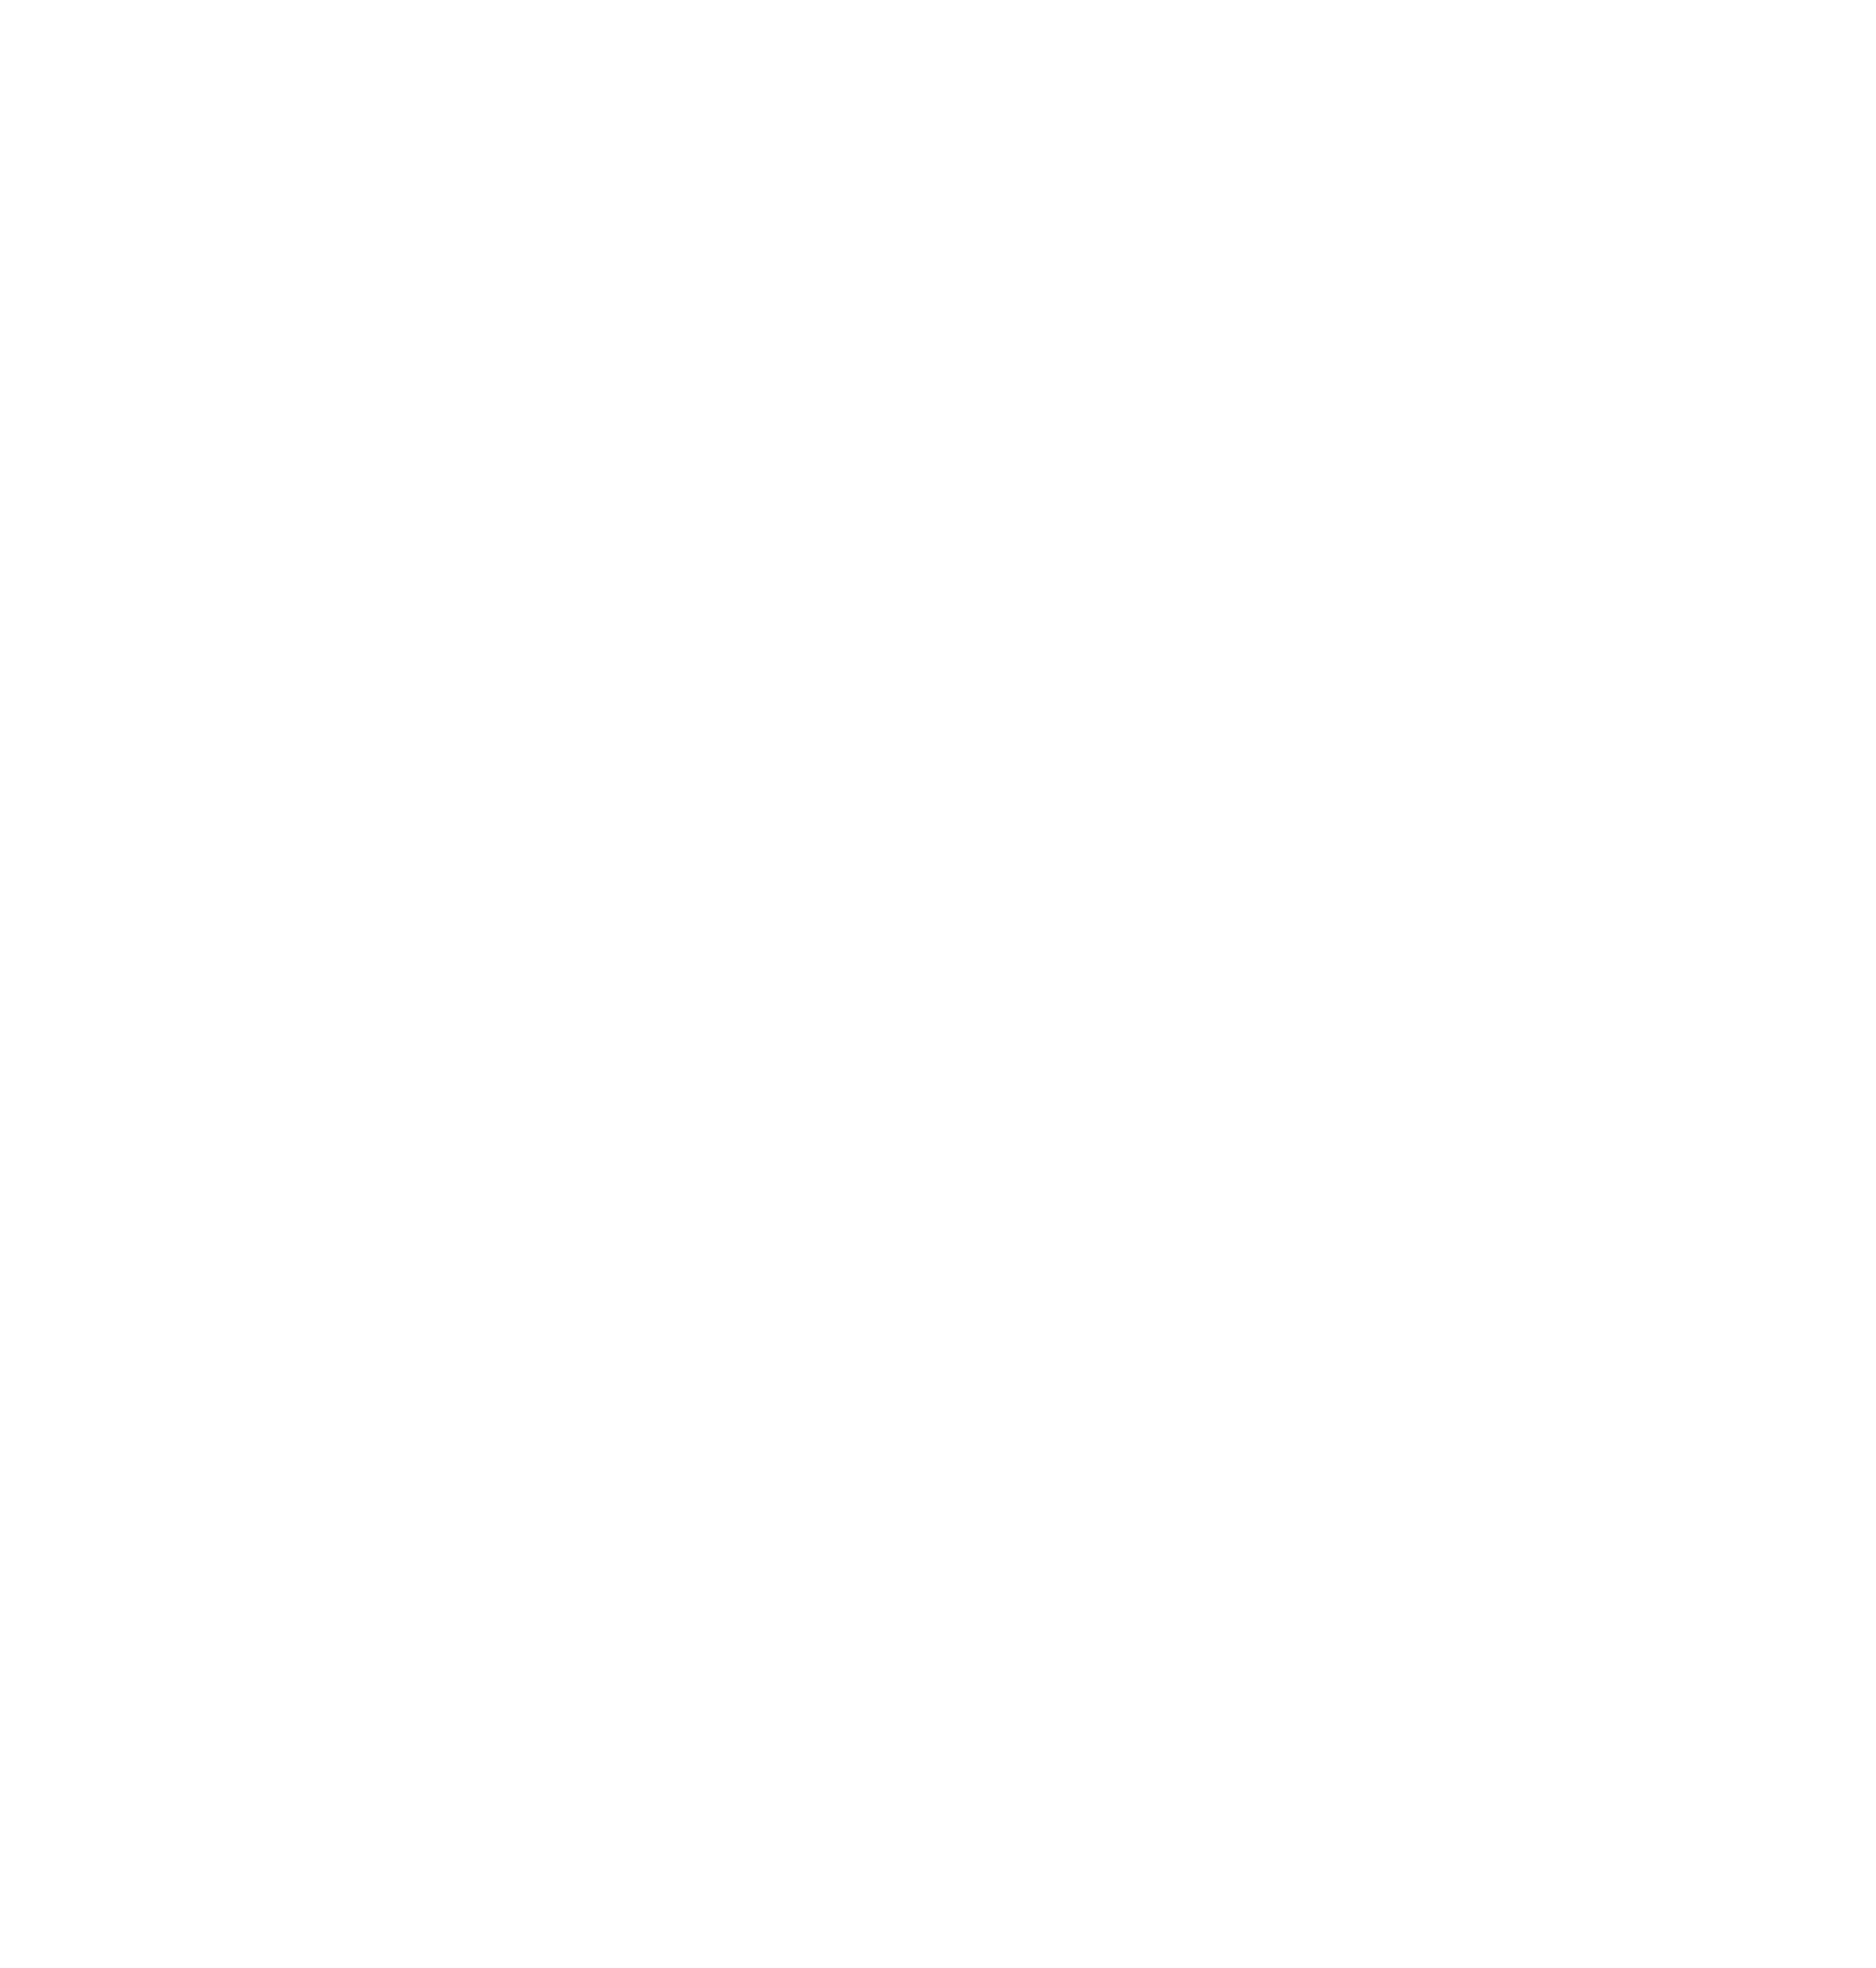 RR Hotels Group